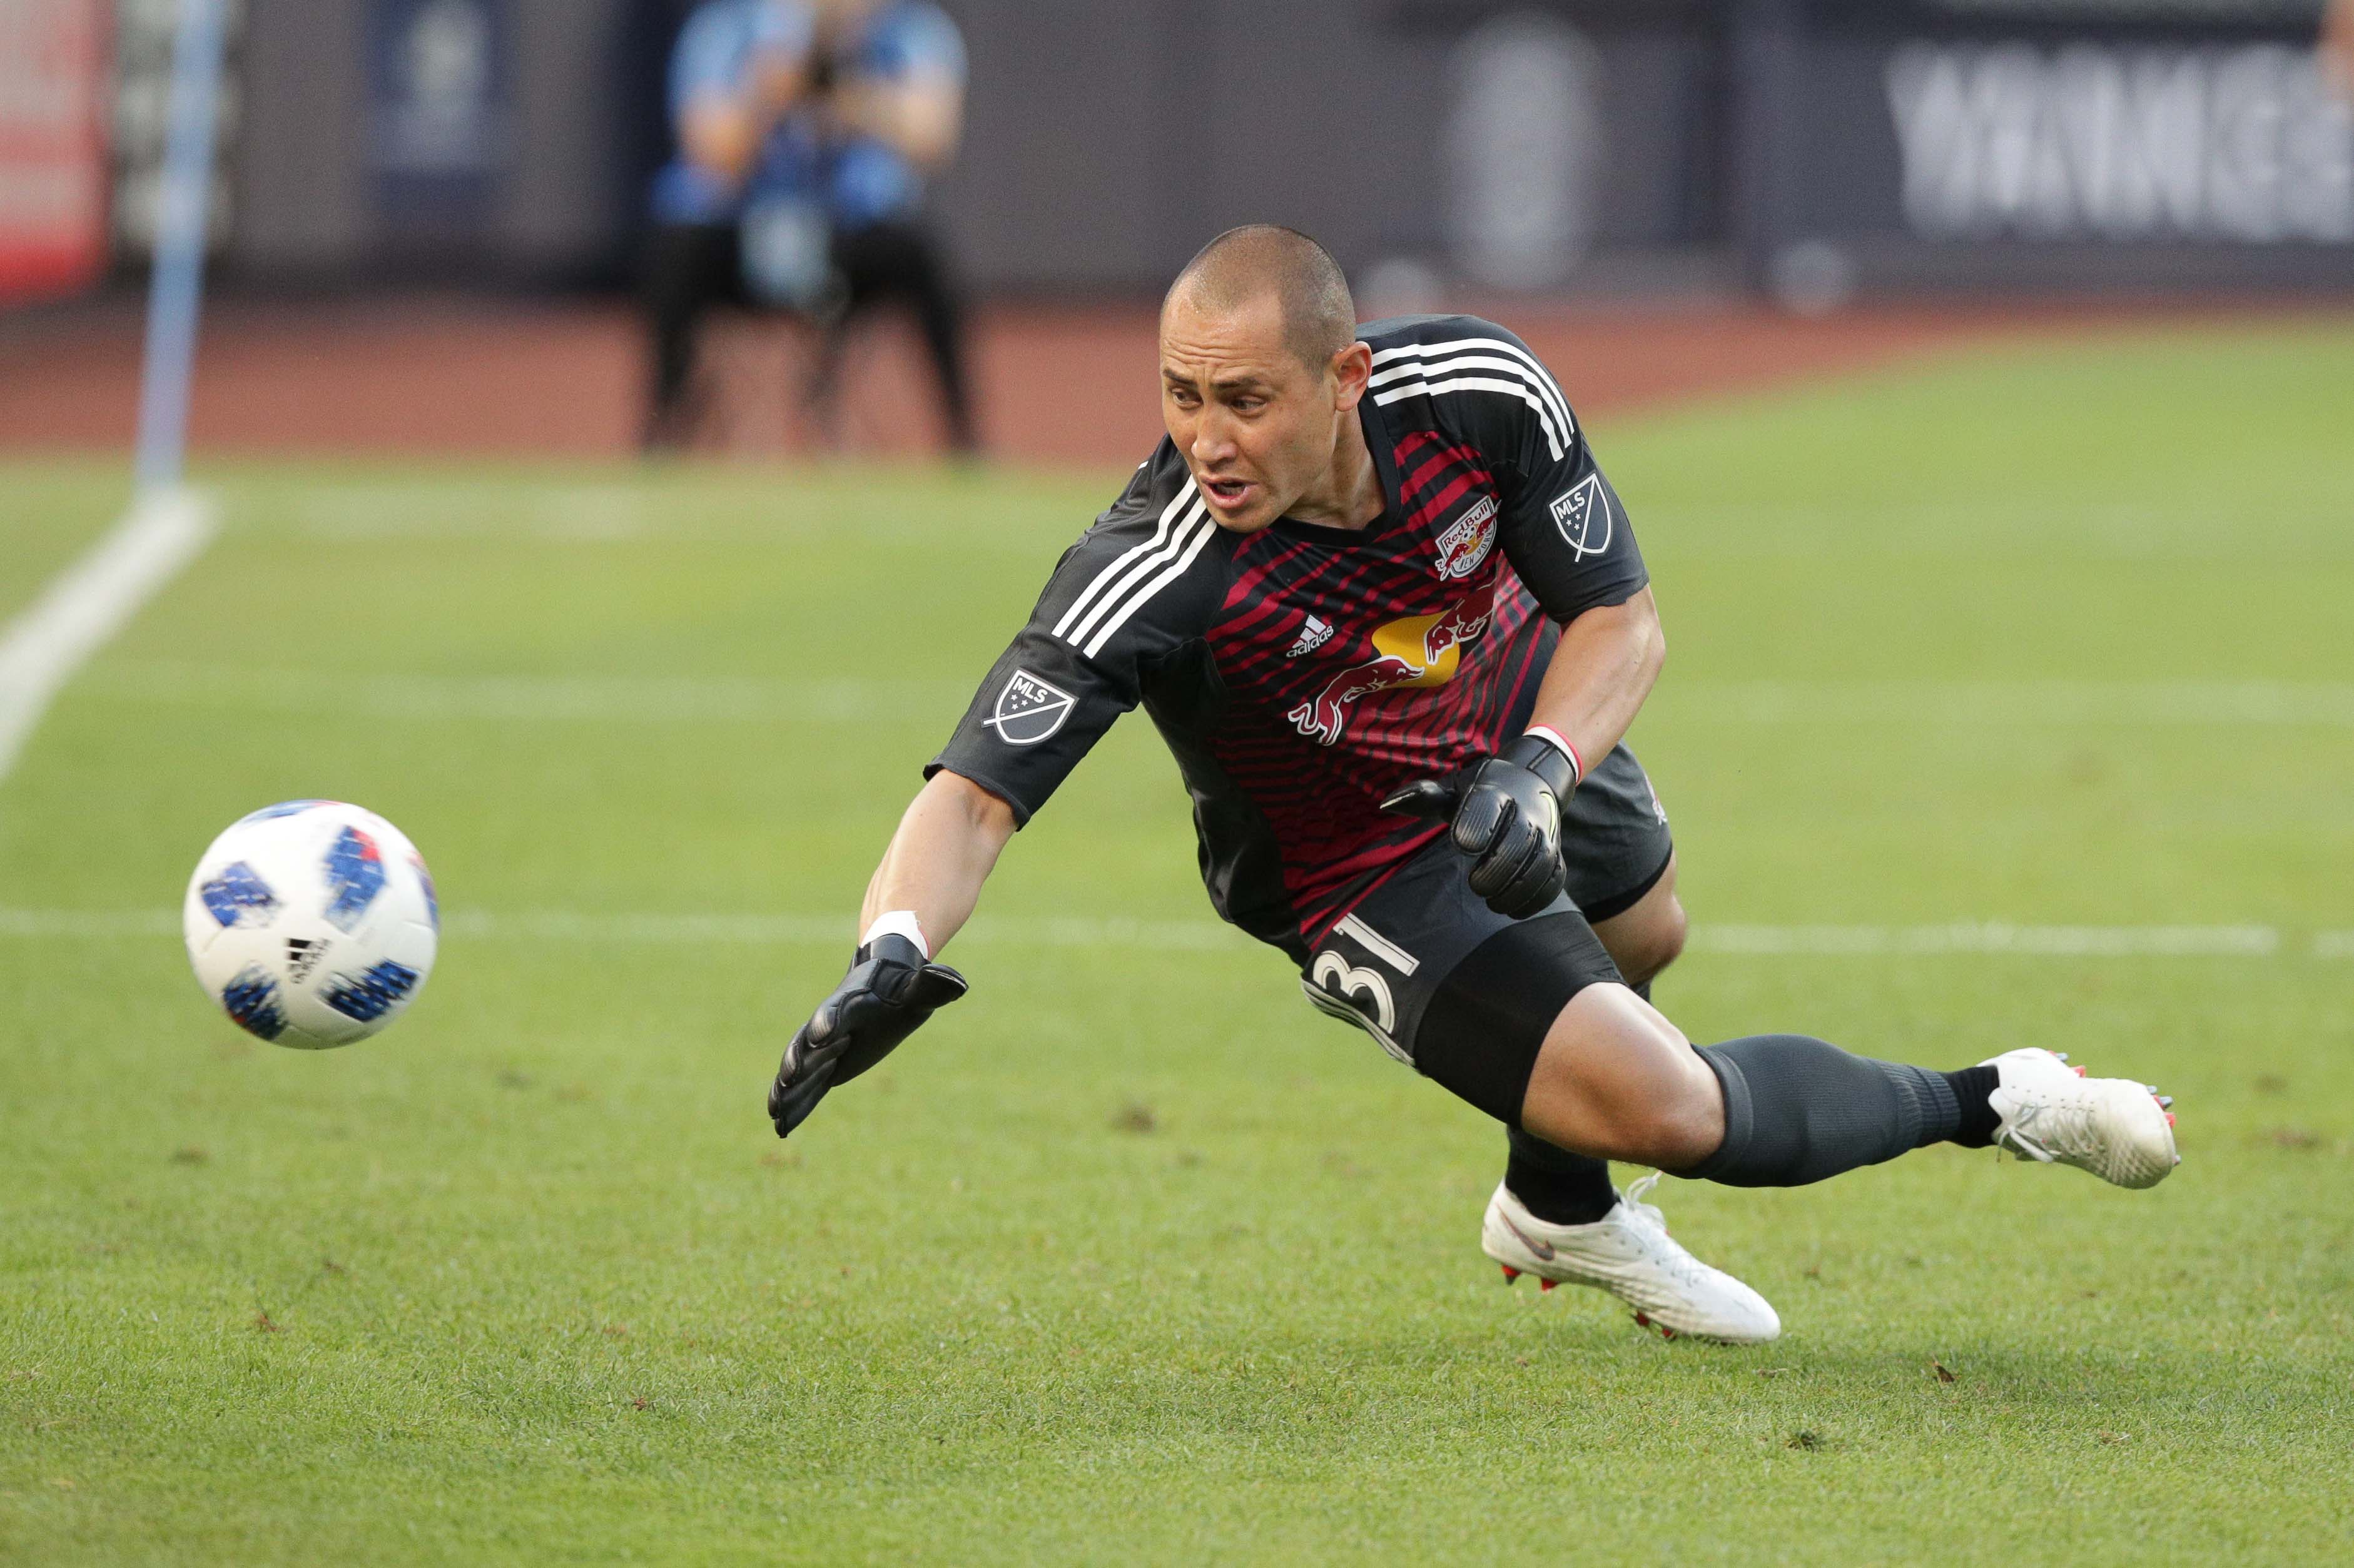 New York Red Bulls goalkeeper Luis Robles dives for a shot during the first half against New York City FC at Yankee Stadium.